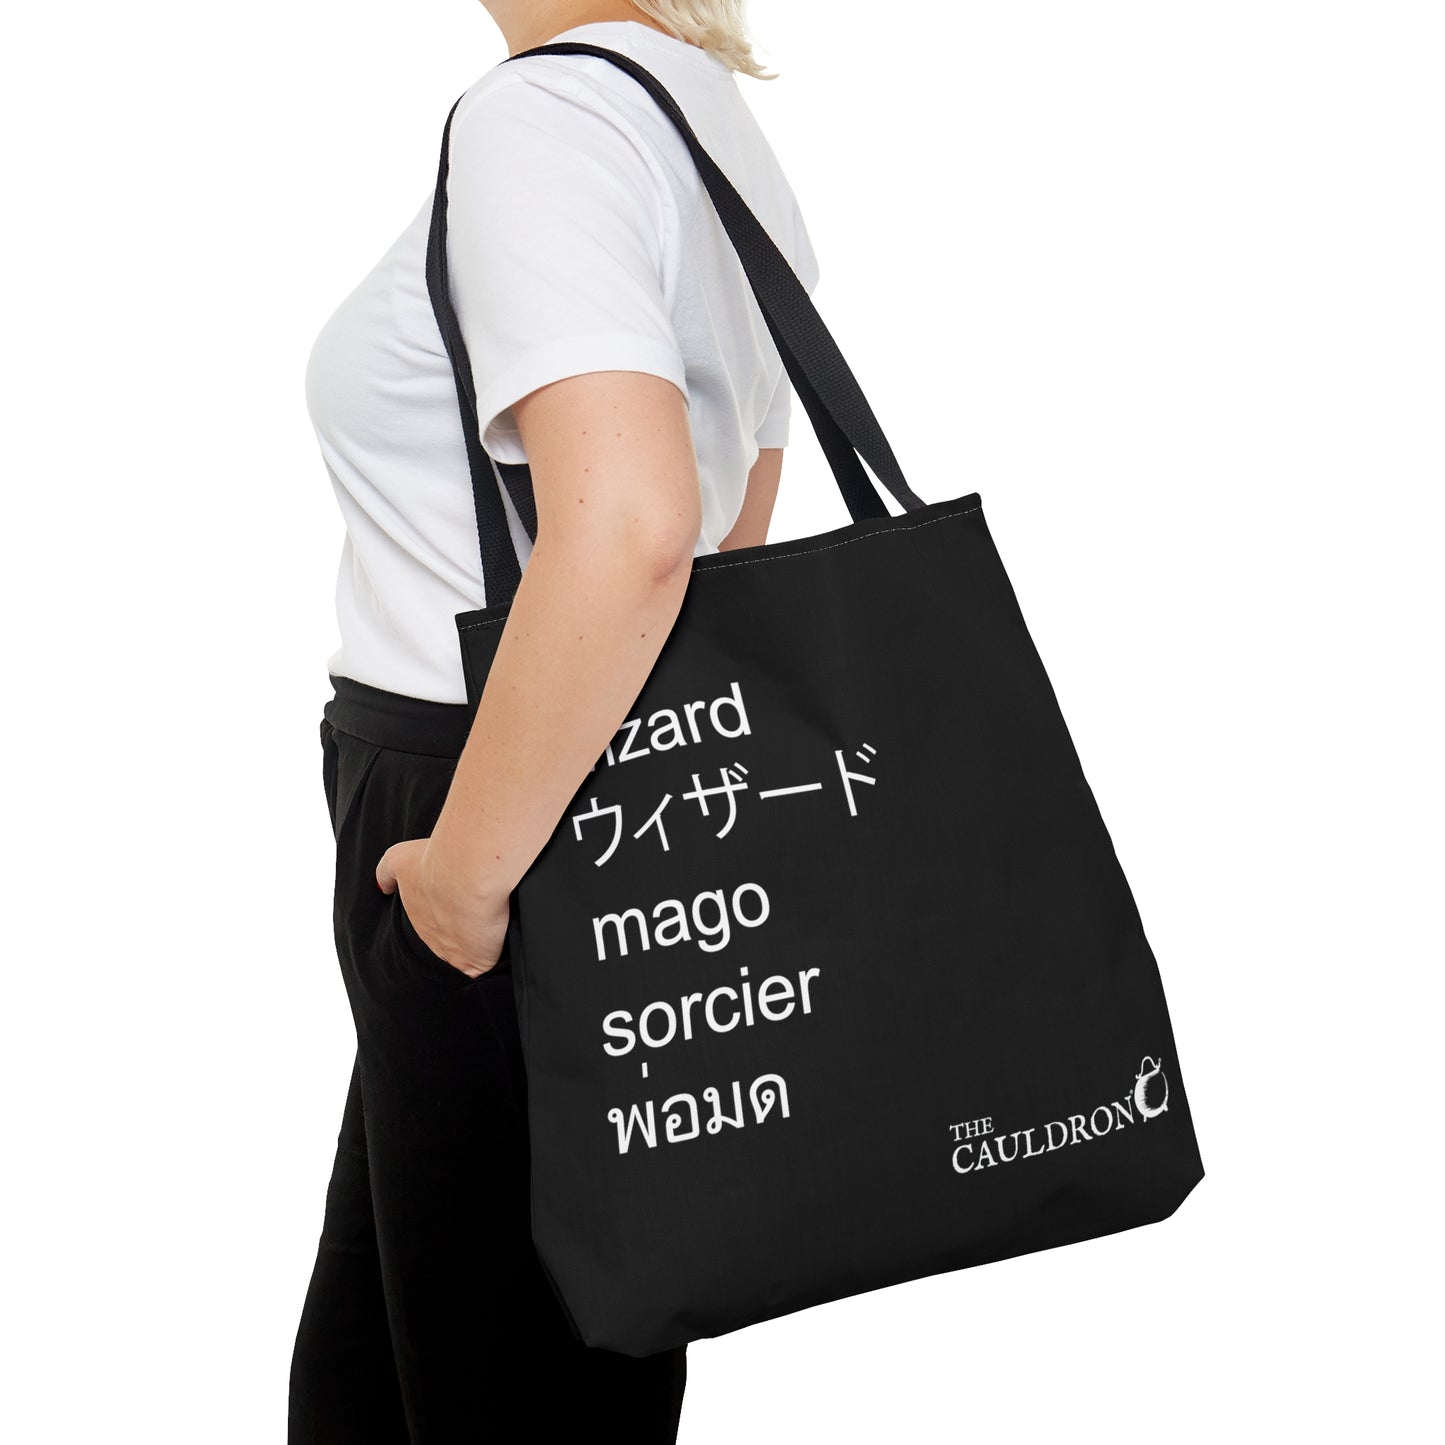 Wizard Tote